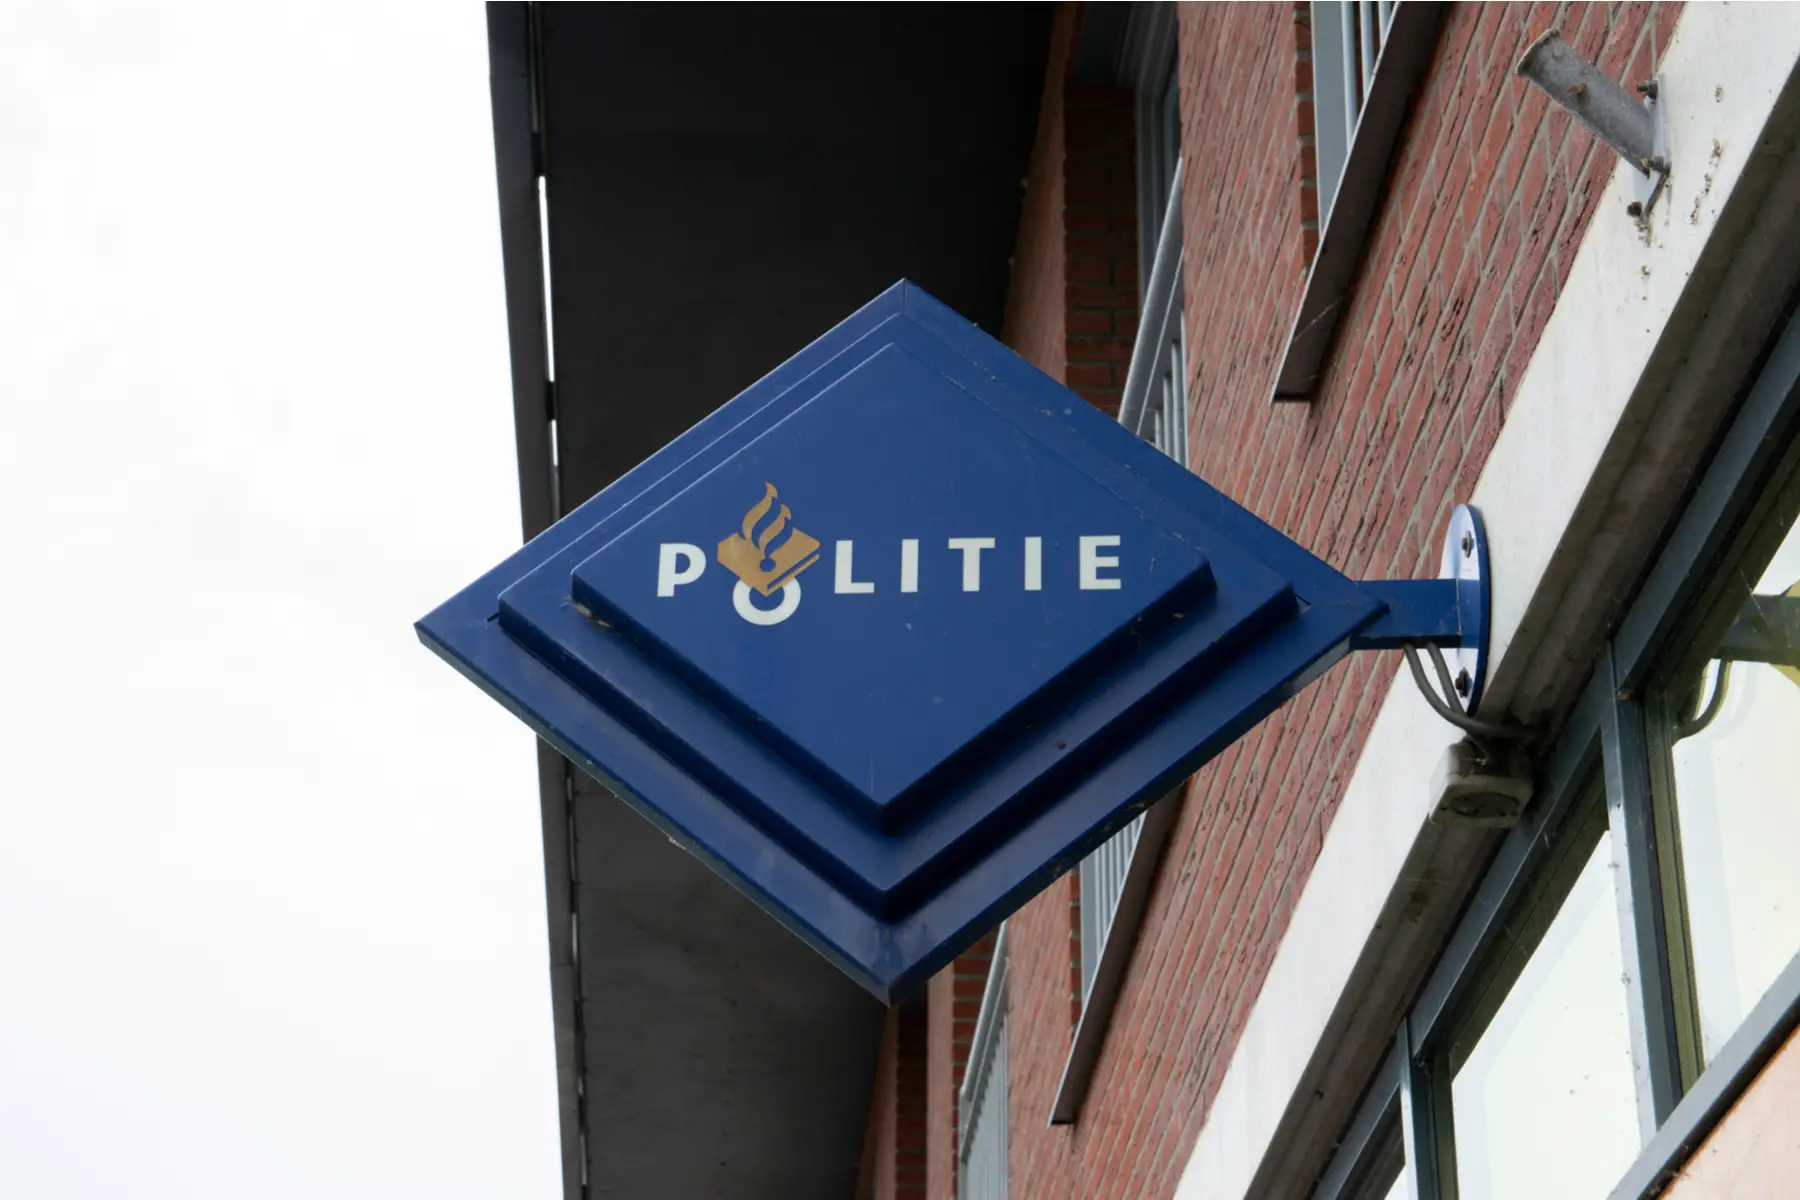 Police station sign in the Netherlands